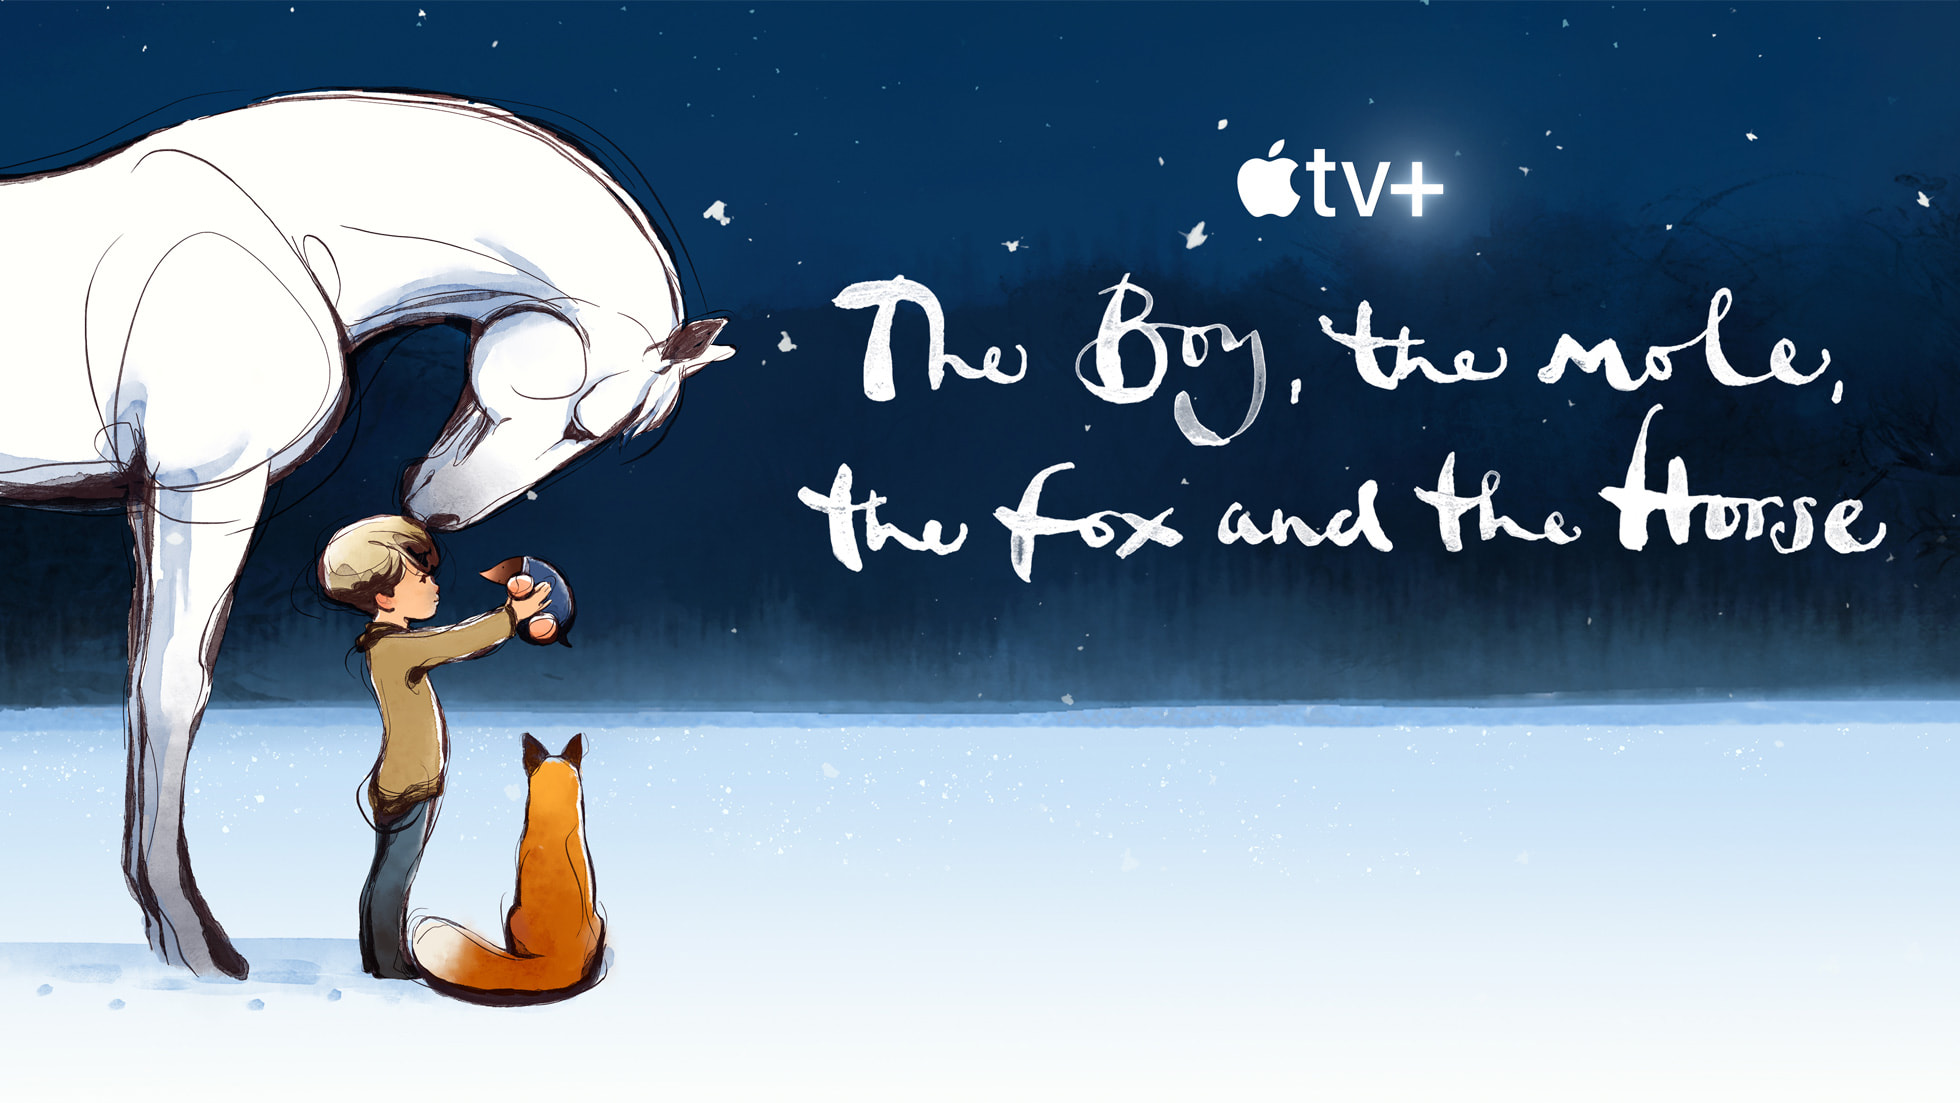 A classically animated boy, fox, horse and mole on snow against a night sky, with the film title in white text.